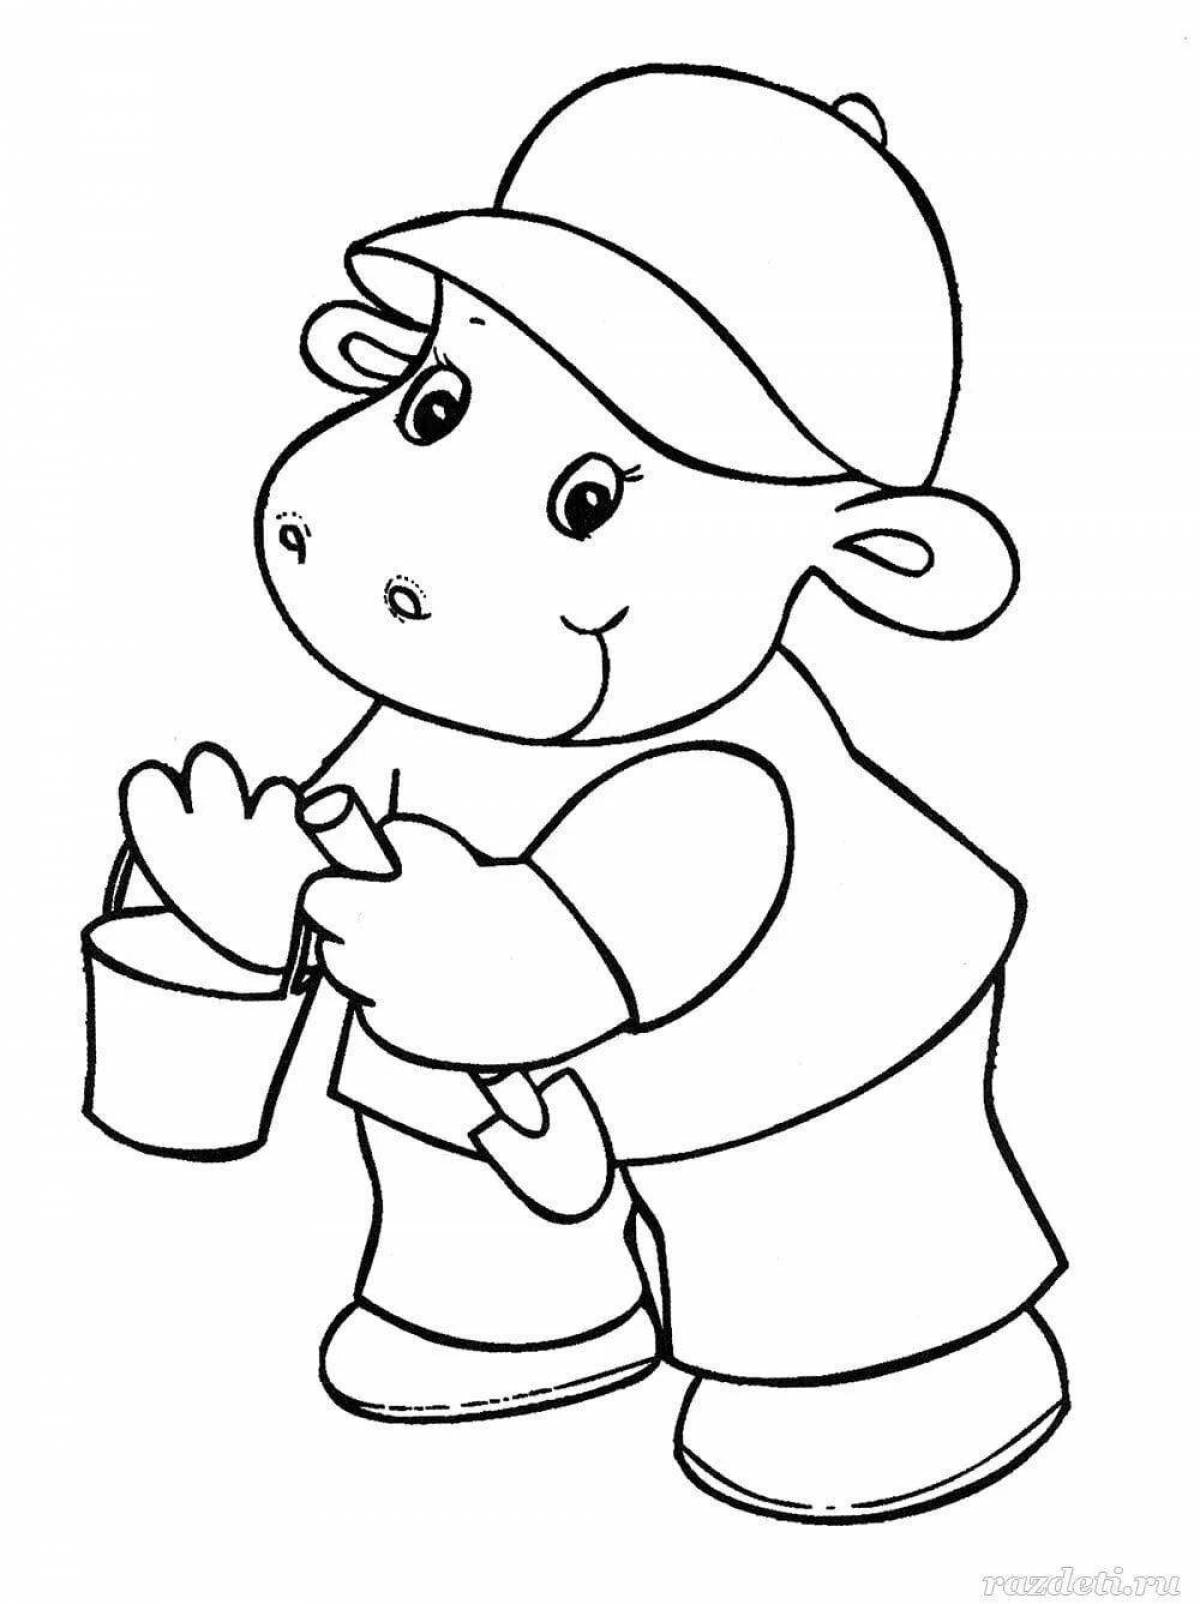 Color-frenzy coloring page детский сад на 5 лет